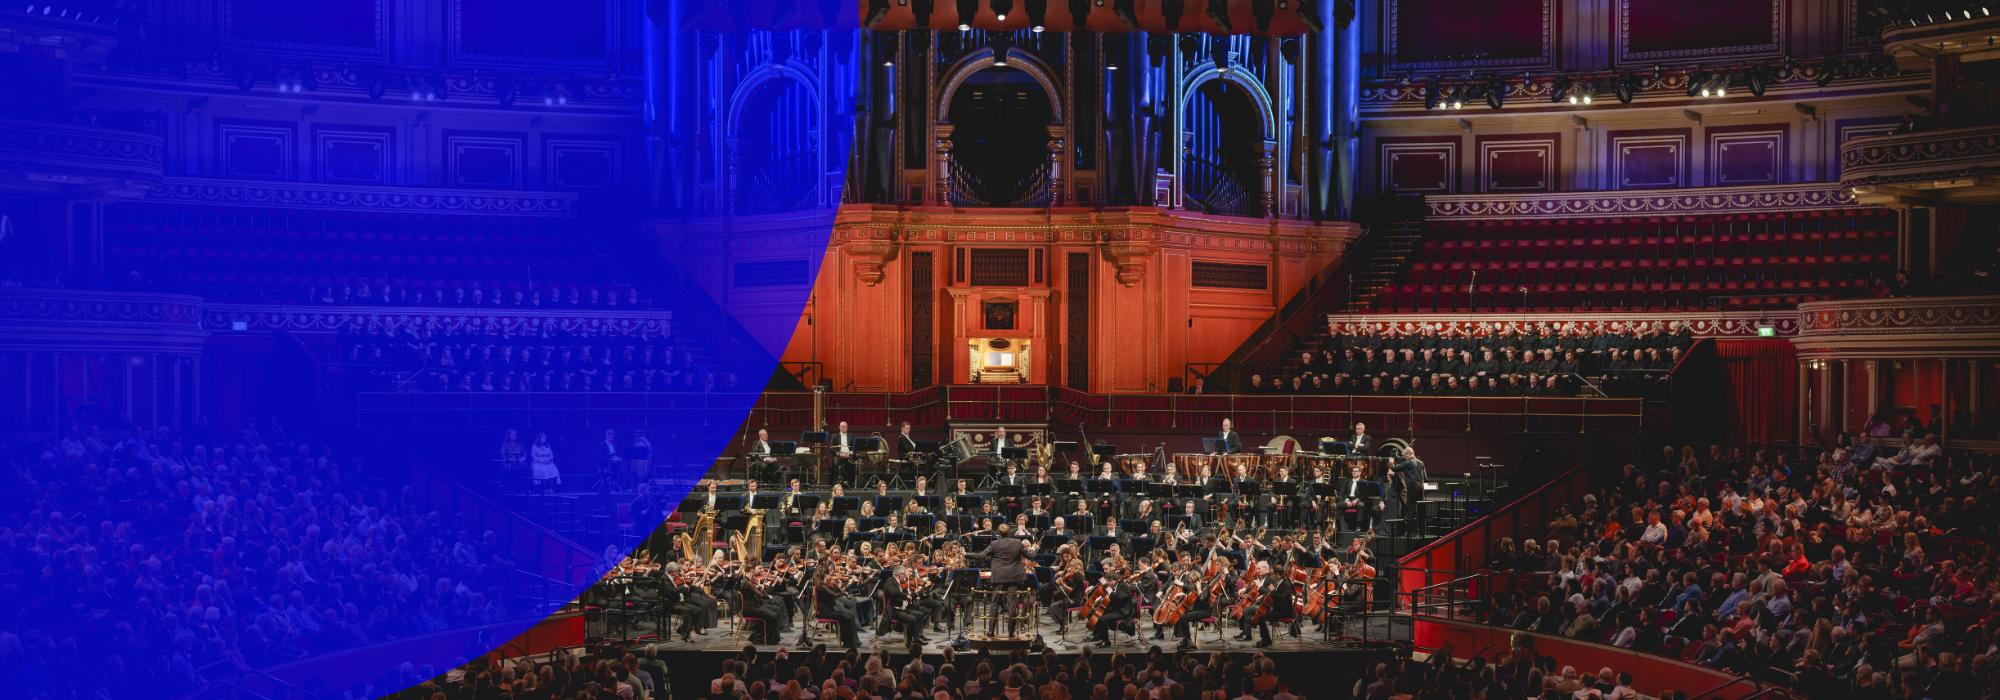 An image of the RPO on stage at the Royal Albert Hall